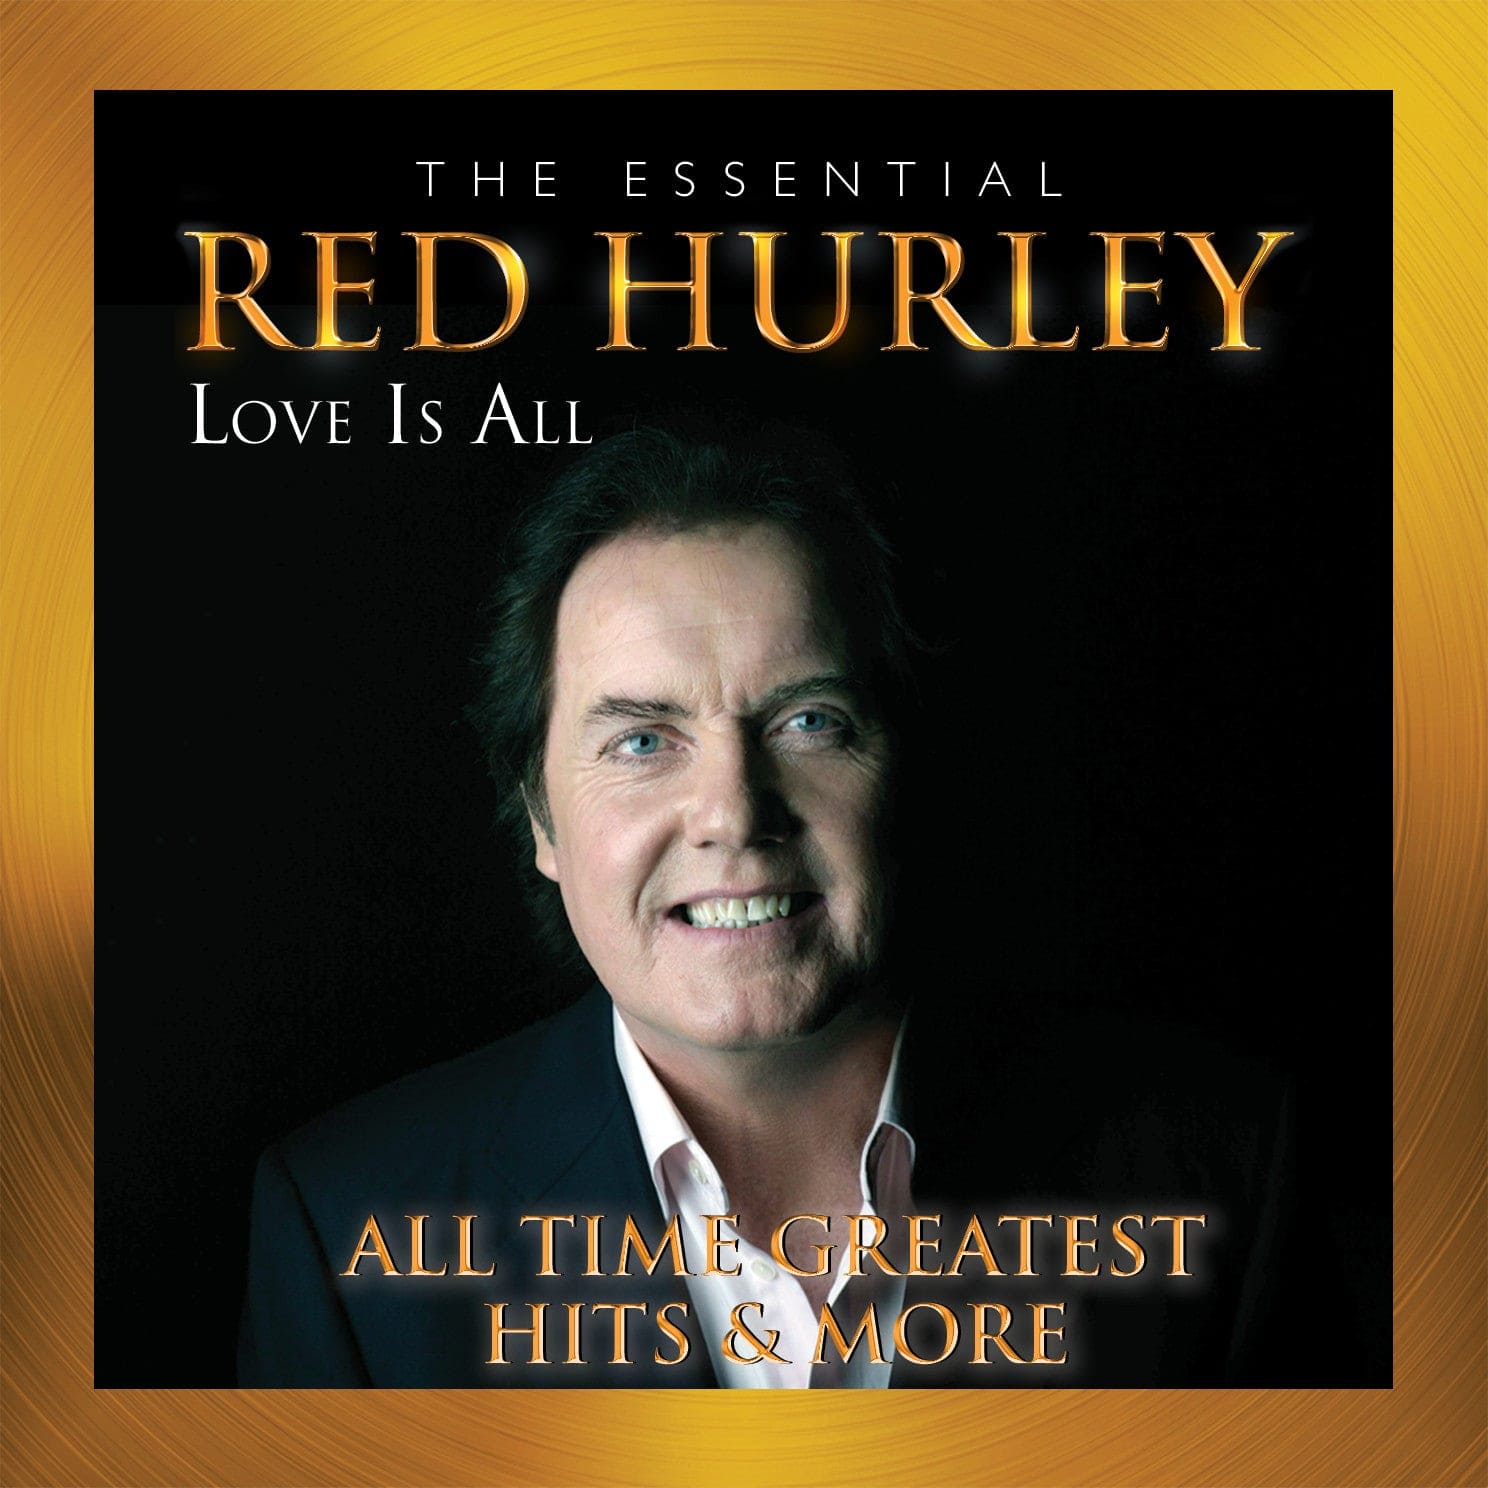 Love Is All (The Essential Red Hurley) - Red Hurley [2CD]